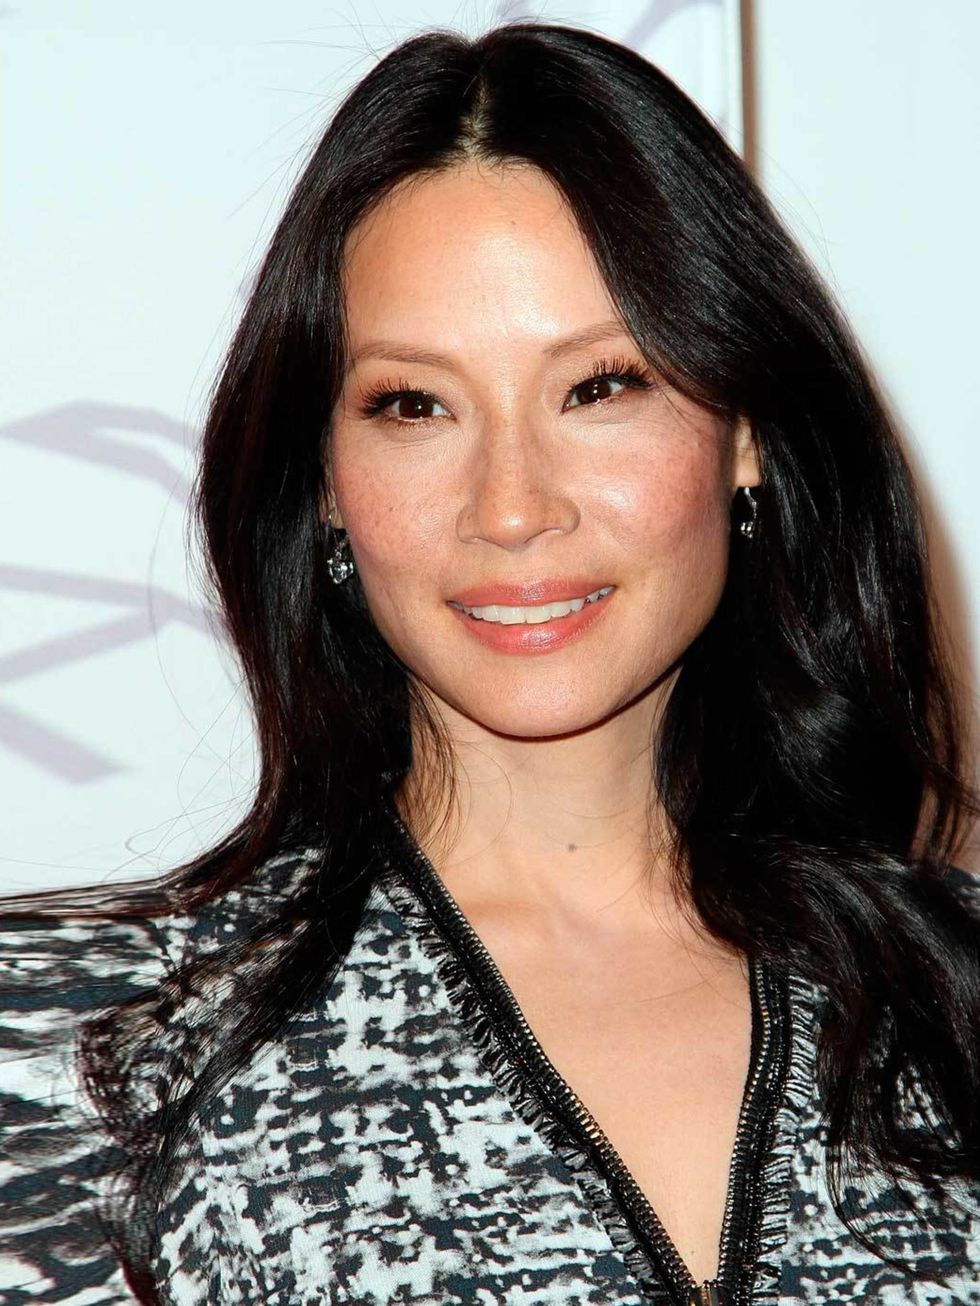 &lt;p&gt;Susie Wong, Deputy Chief Sub-Editor, &lsquo;Seeing as there won&rsquo;t be a picture of me next to her (phew) I am going to go with &lt;a href=&quot;http://www.elleuk.com/star-style/red-carpet/emmy-awards-2012&quot;&gt;Lucy Liu&lt;/a&gt;..&rsquo;